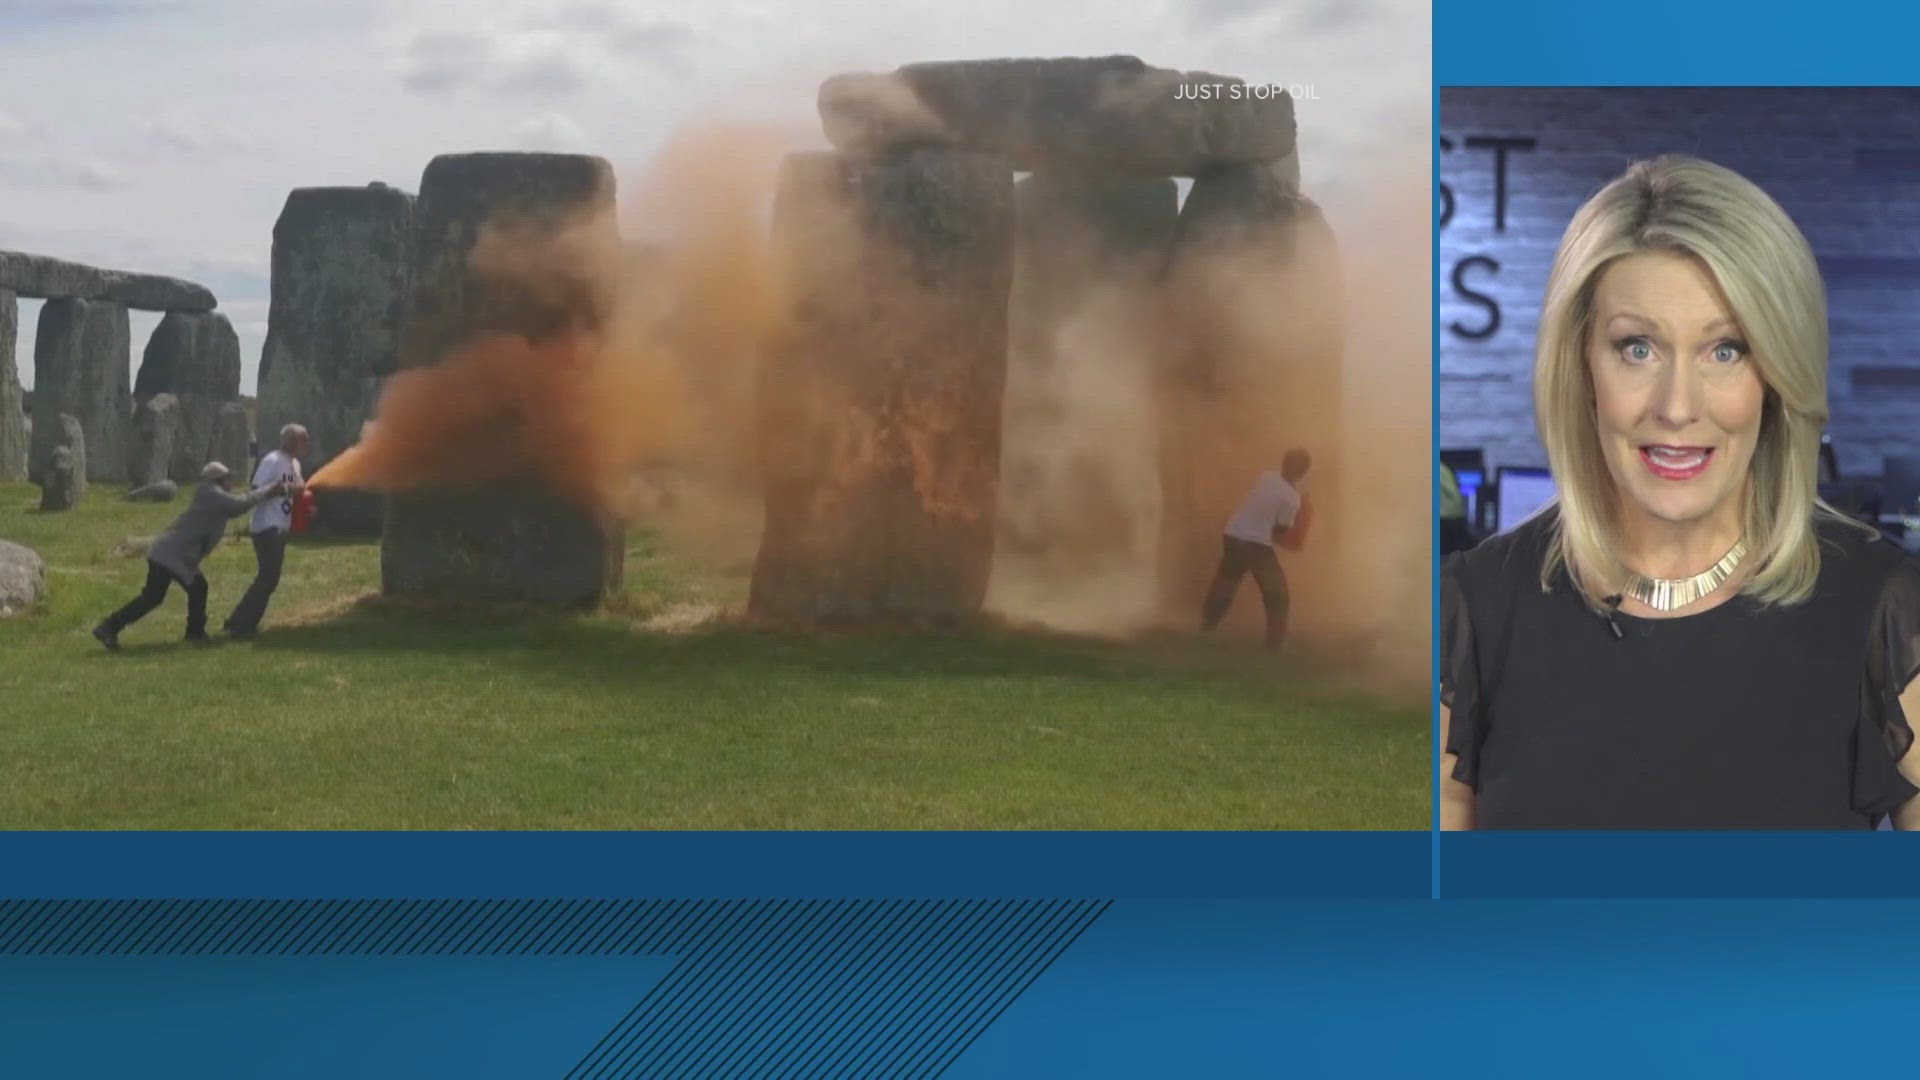 Police said the pair were arrested Wednesday on suspicion of damaging the ancient Stonehenge monument in Southern England.